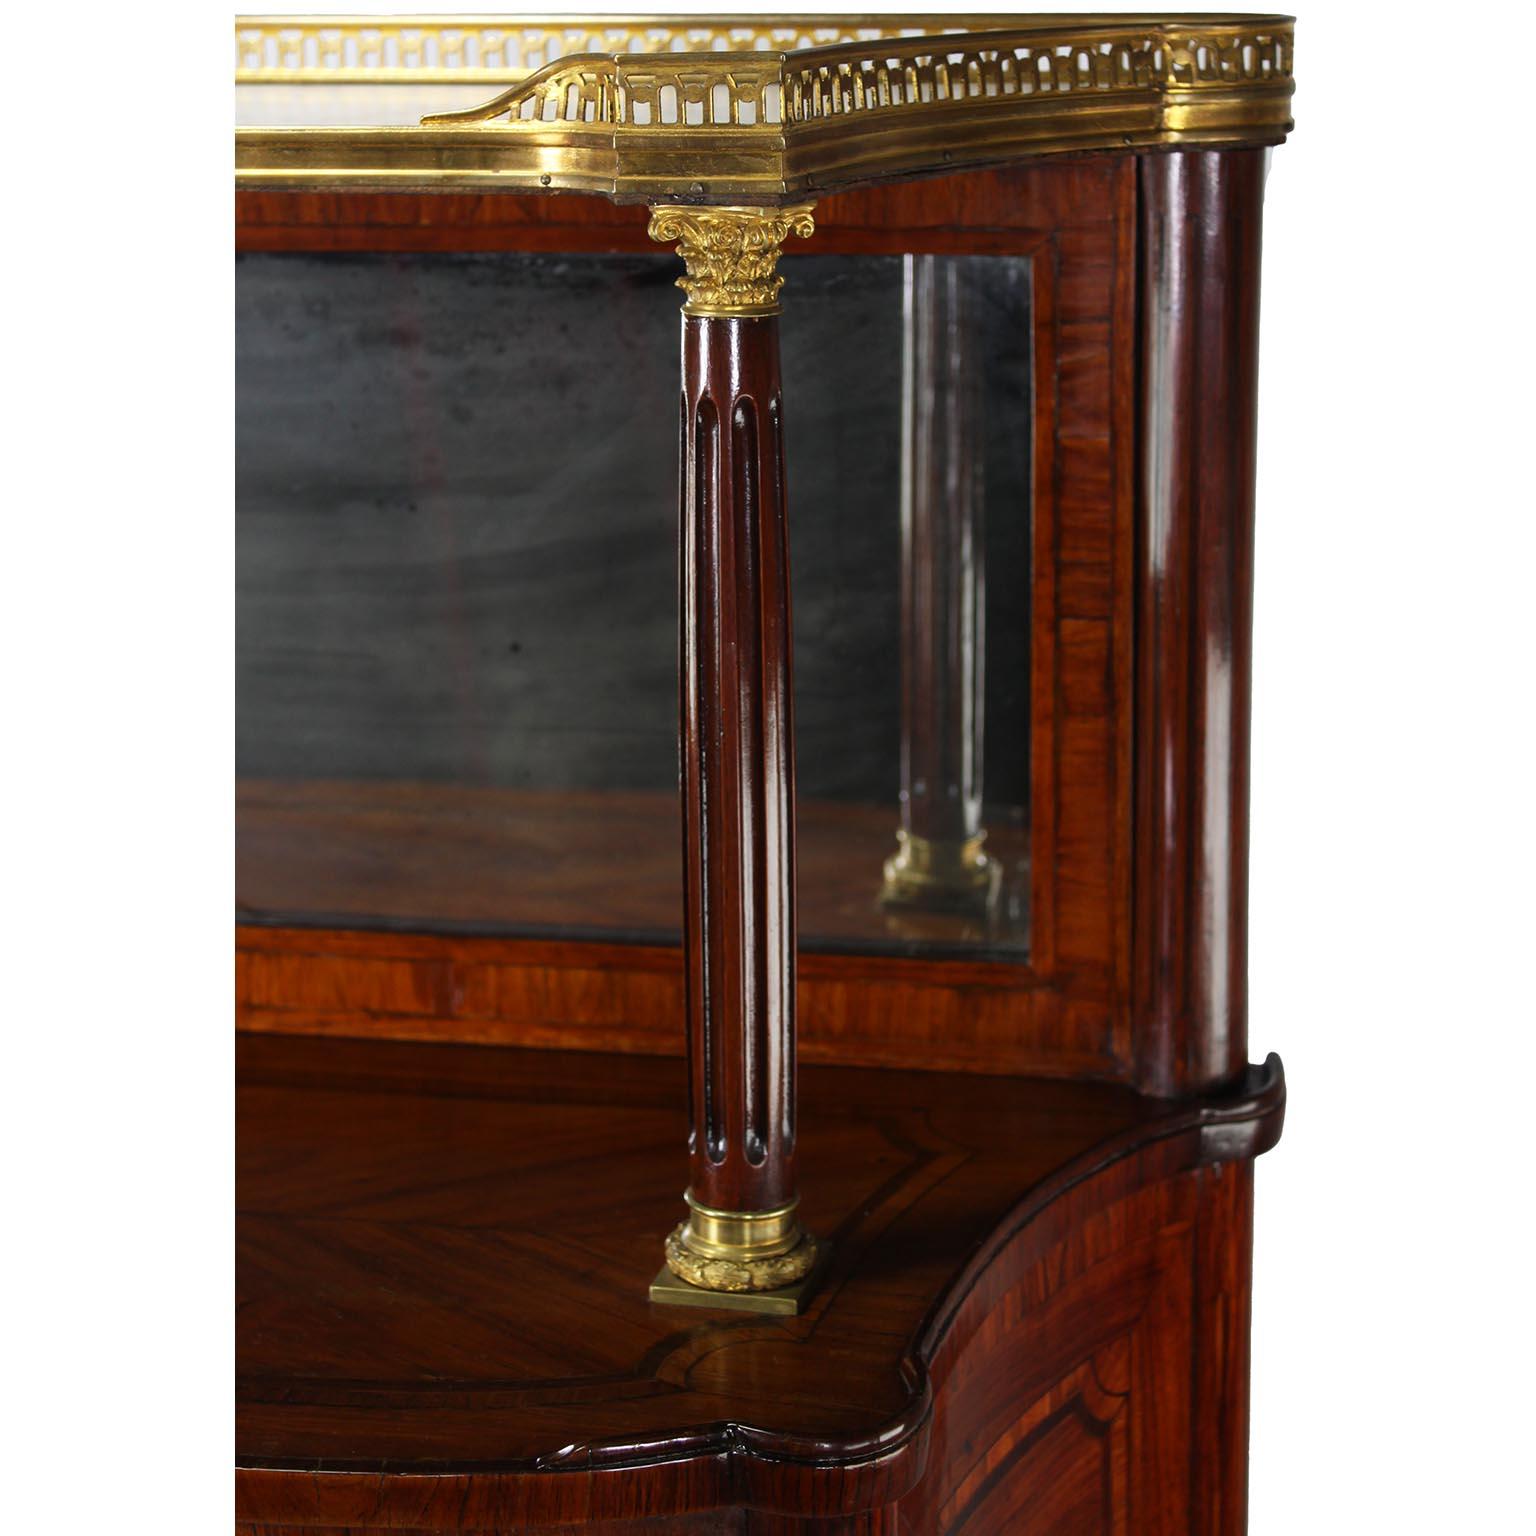 A French 19th Century Louis XVI Style Gilt-Bronze Mounted Meuble d'Appui Cabinet For Sale 5